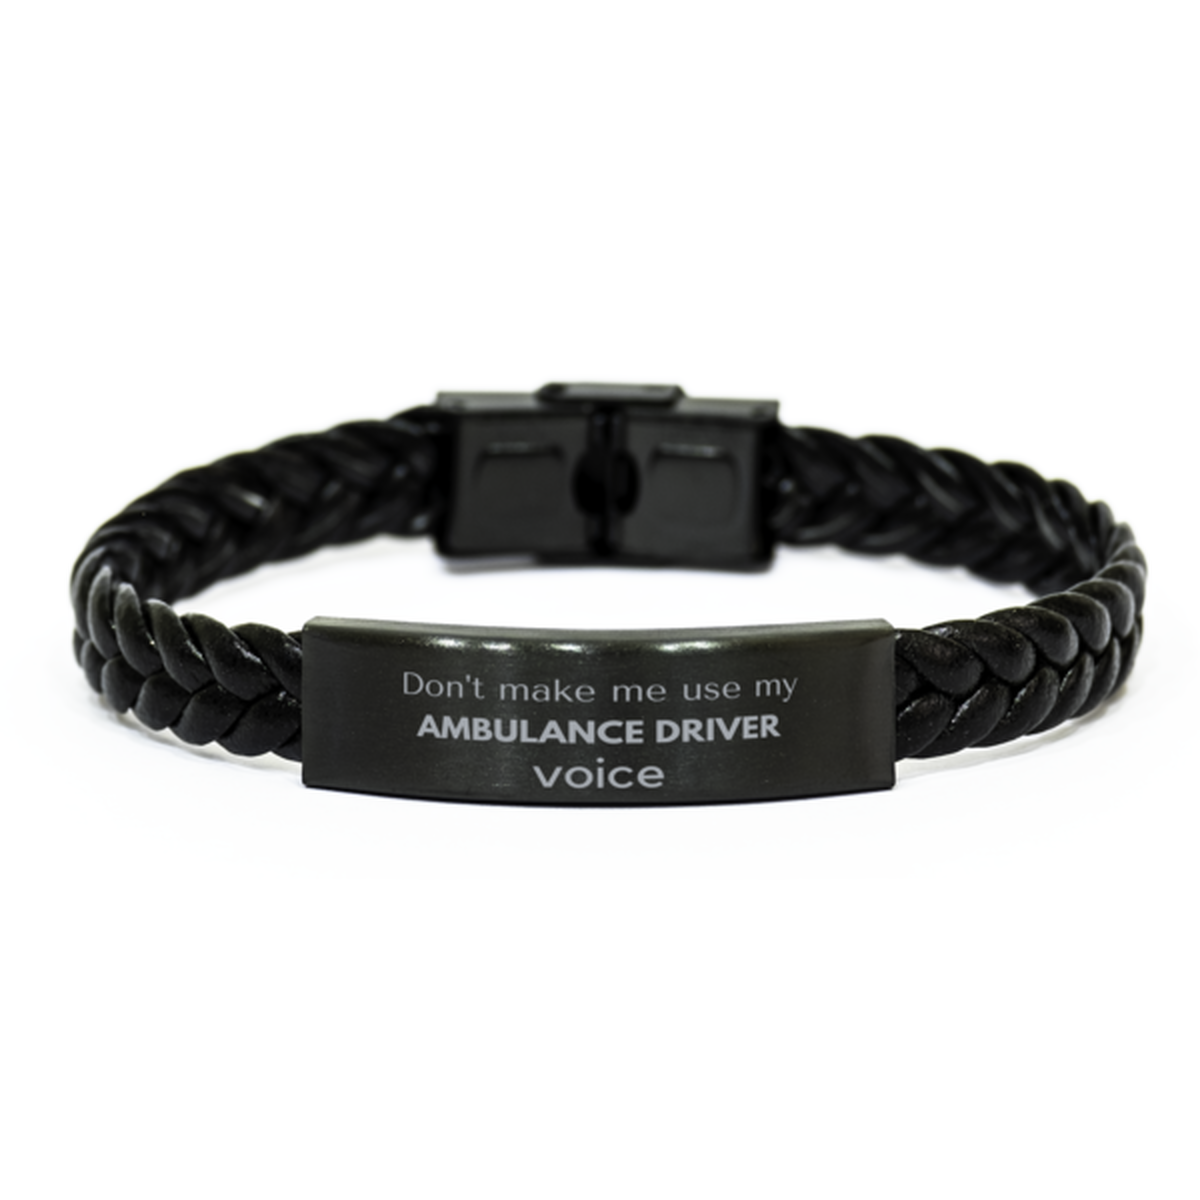 Don't make me use my Ambulance Driver voice, Sarcasm Ambulance Driver Gifts, Christmas Ambulance Driver Braided Leather Bracelet Birthday Unique Gifts For Ambulance Driver Coworkers, Men, Women, Colleague, Friends